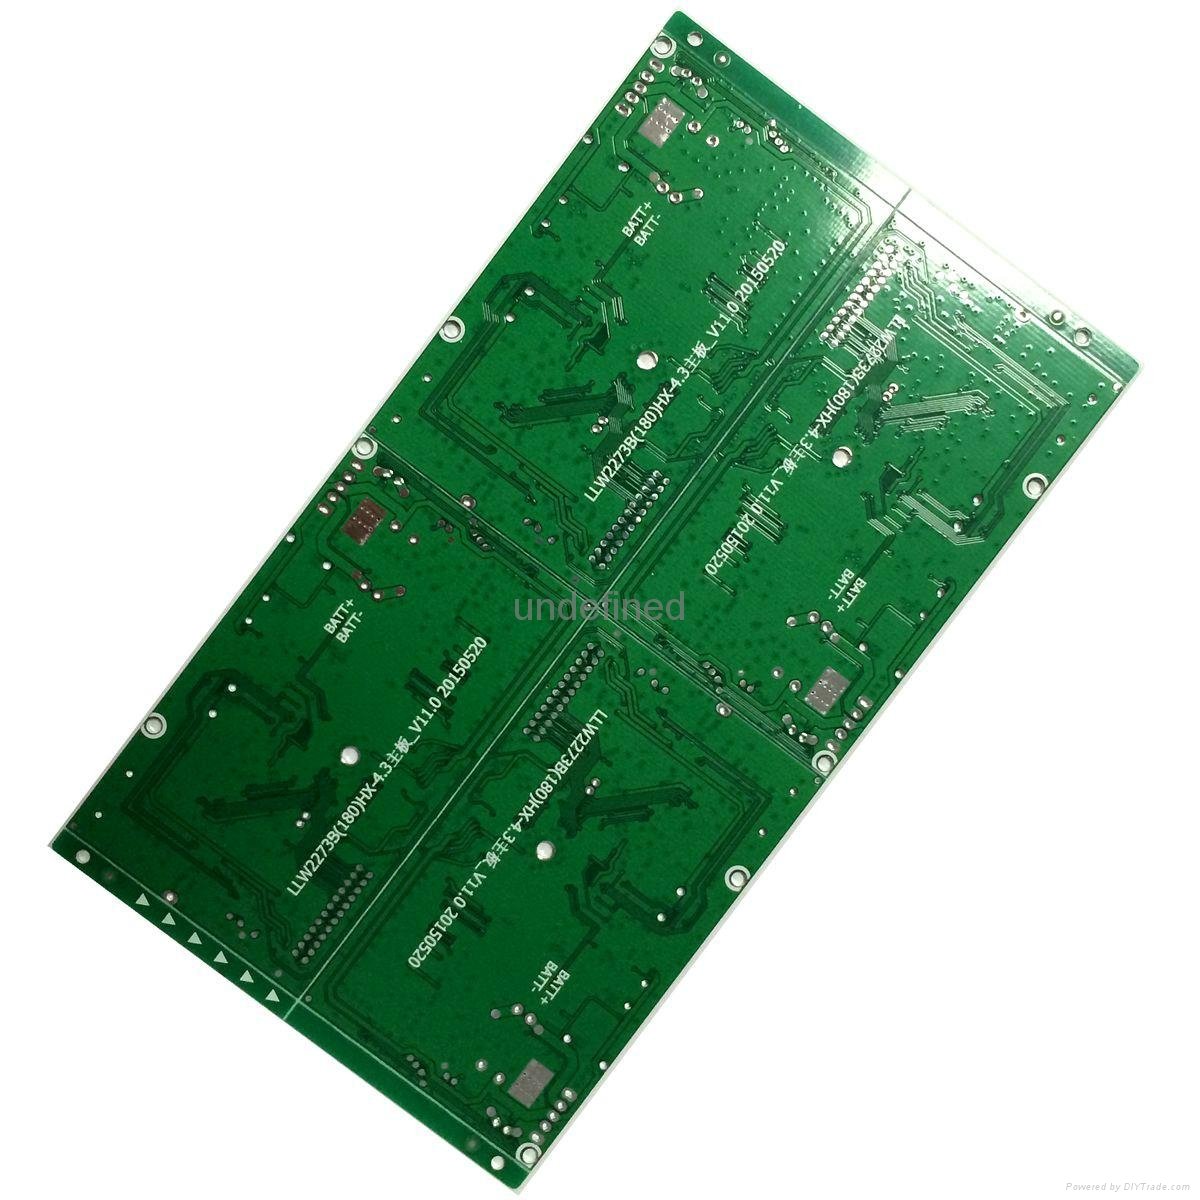 Lead-free HAL Rigid PCB for MotherBoard